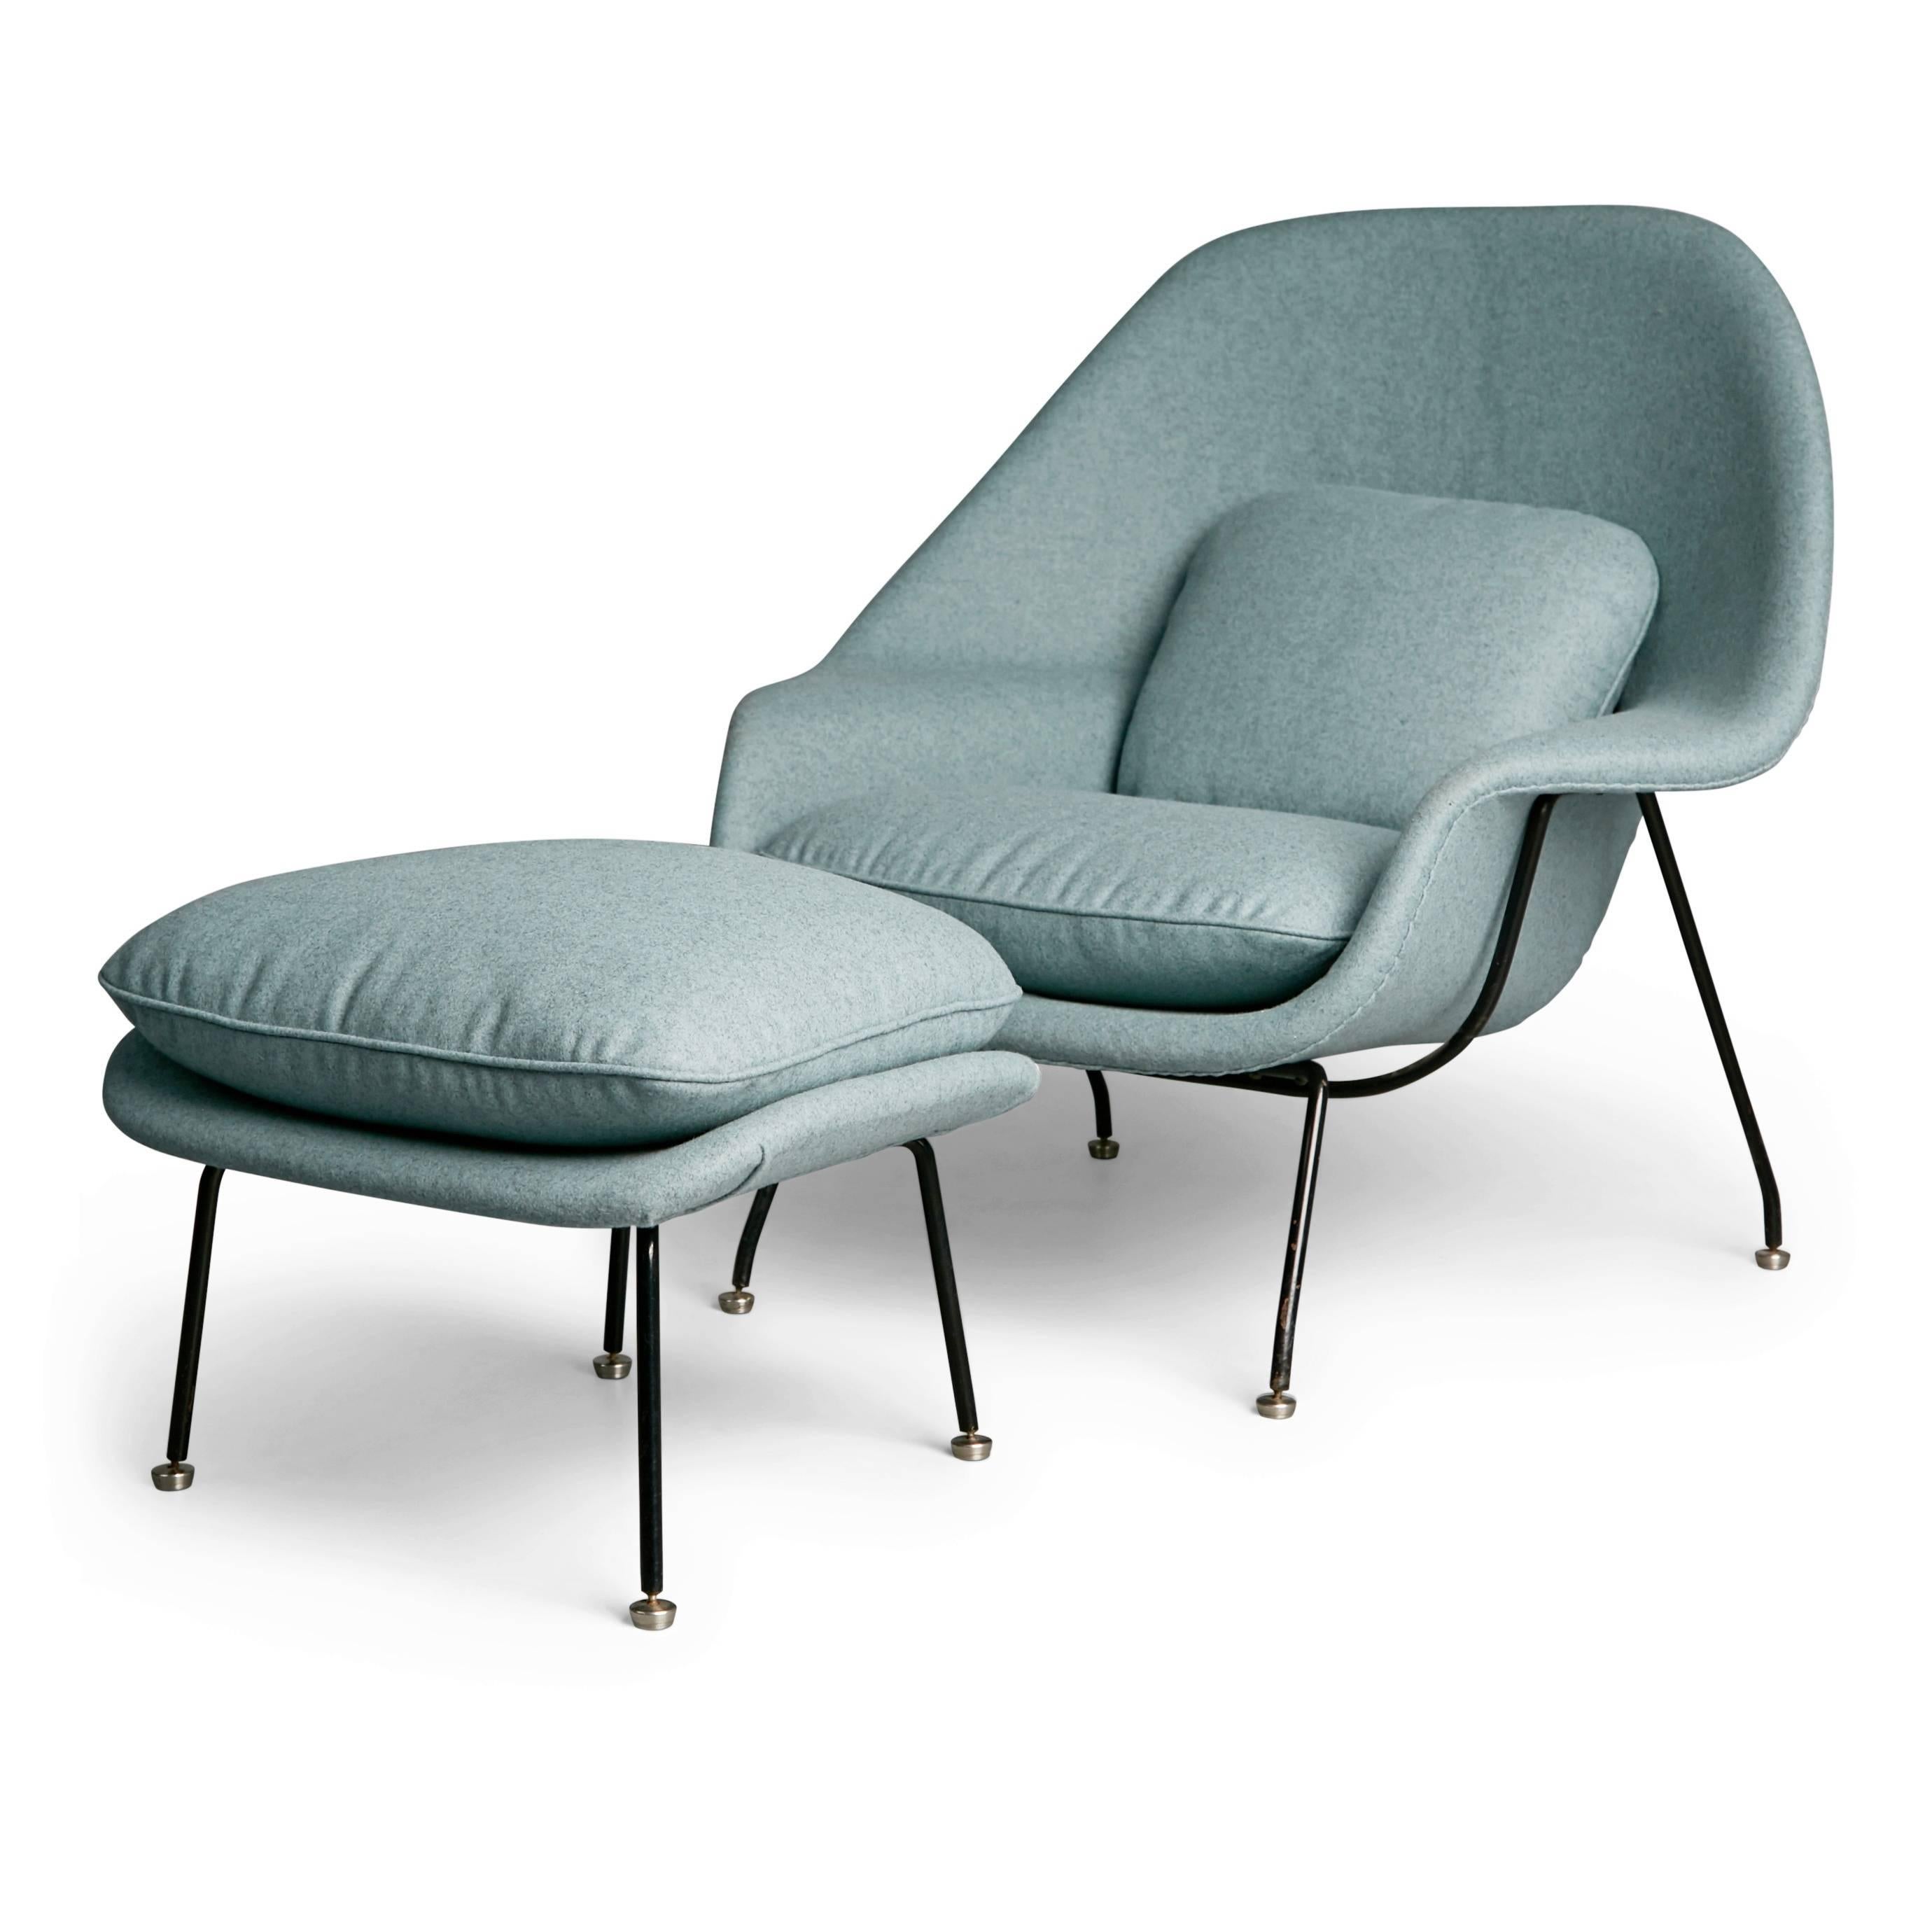 Newly upholstered early production womb chair by Eero Saarinen for Knoll Associates. This example possesses an early production black frame which looks striking against the blueish wool. The flat glides (feet) help to attribute this set to being a